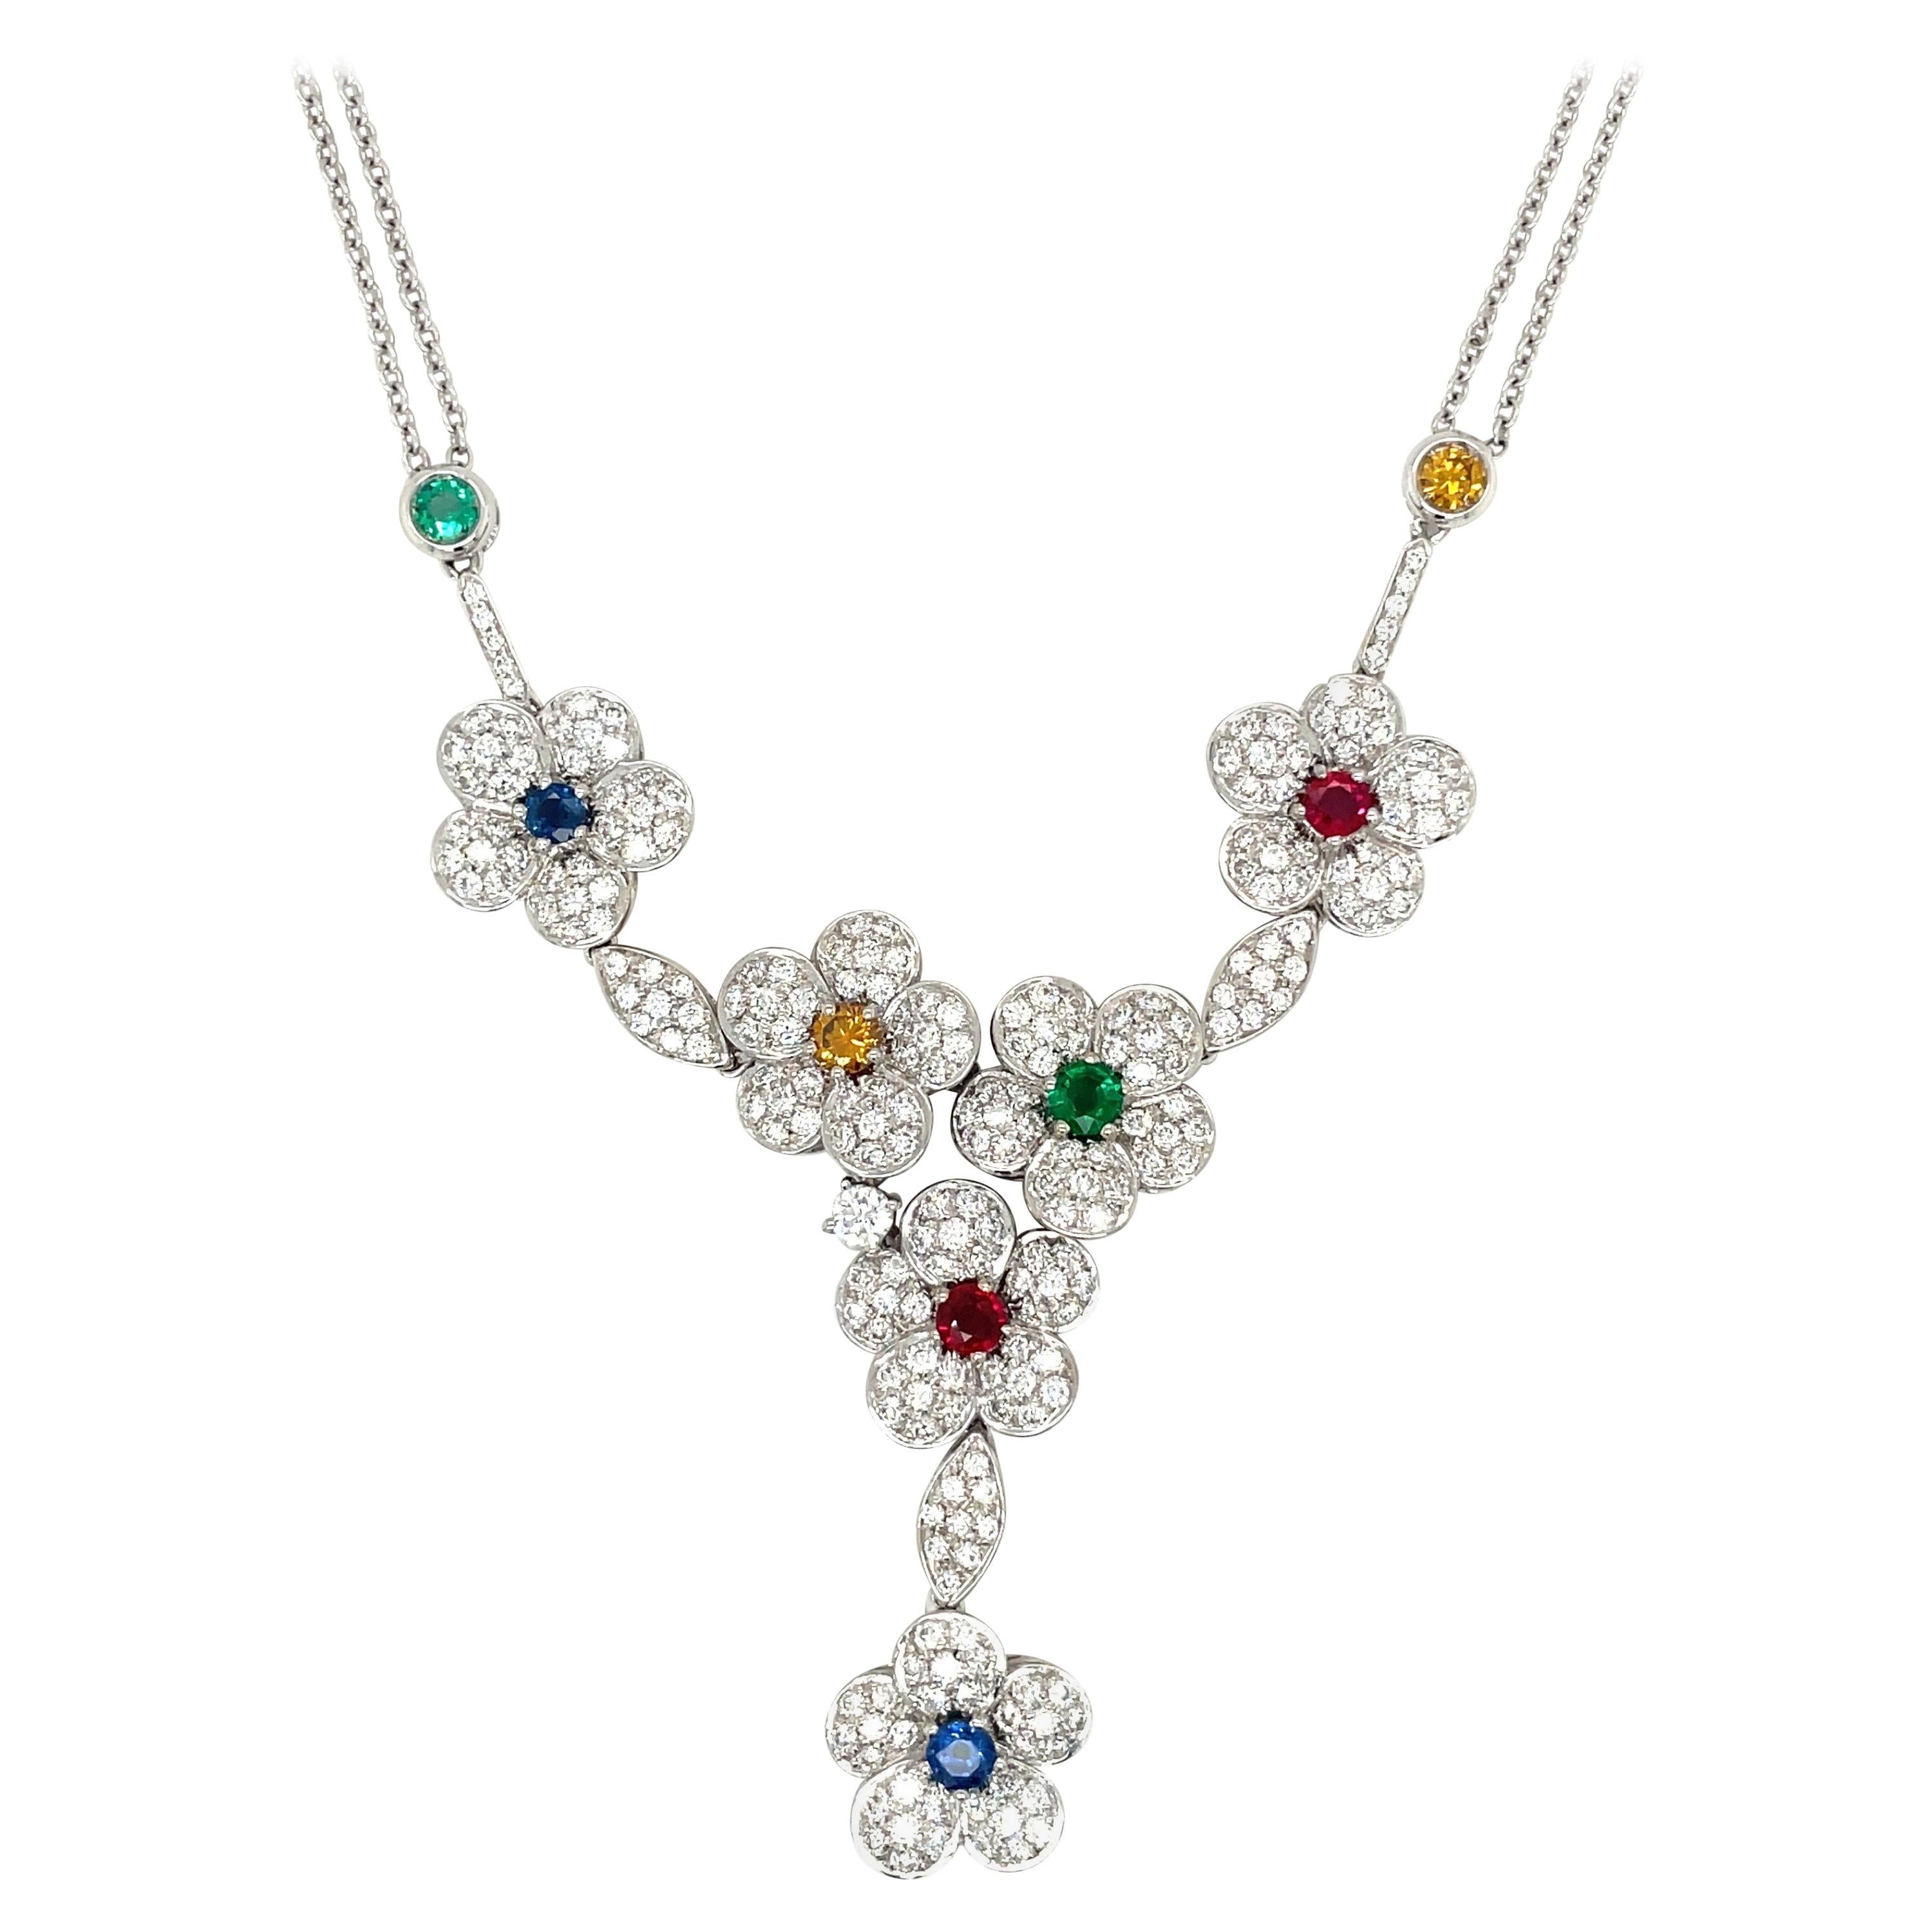 Diamond Flower Necklace with Rubies, Emeralds, and Sapphires